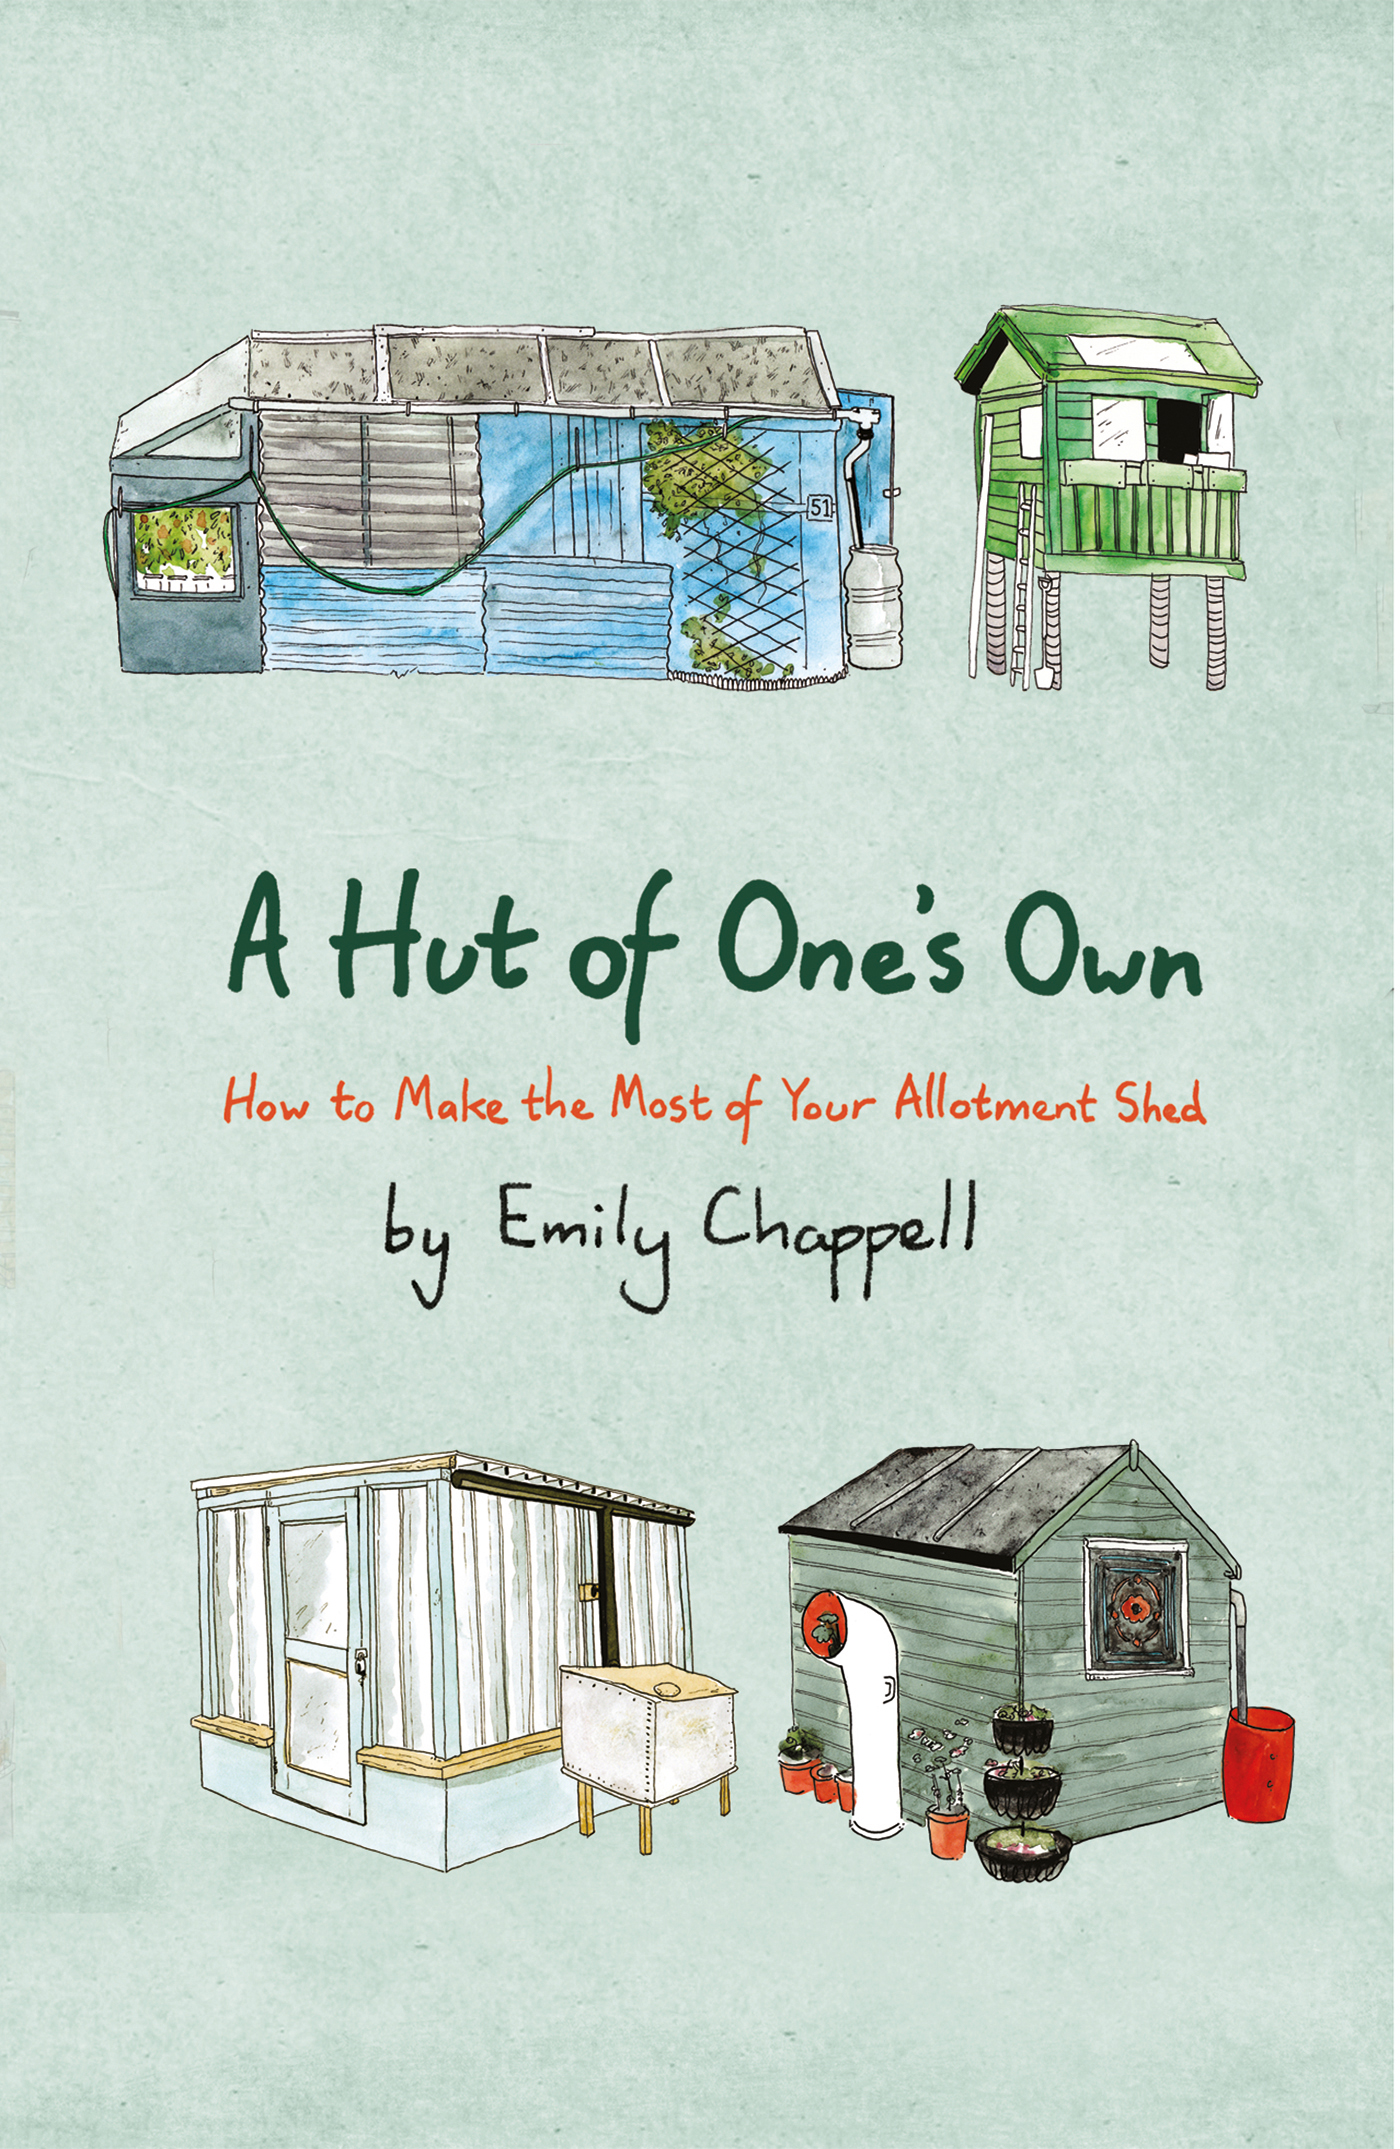 A HUT OF ONES OWN How to Make the Most of Your Allotment Shed Emily Chappell - photo 1